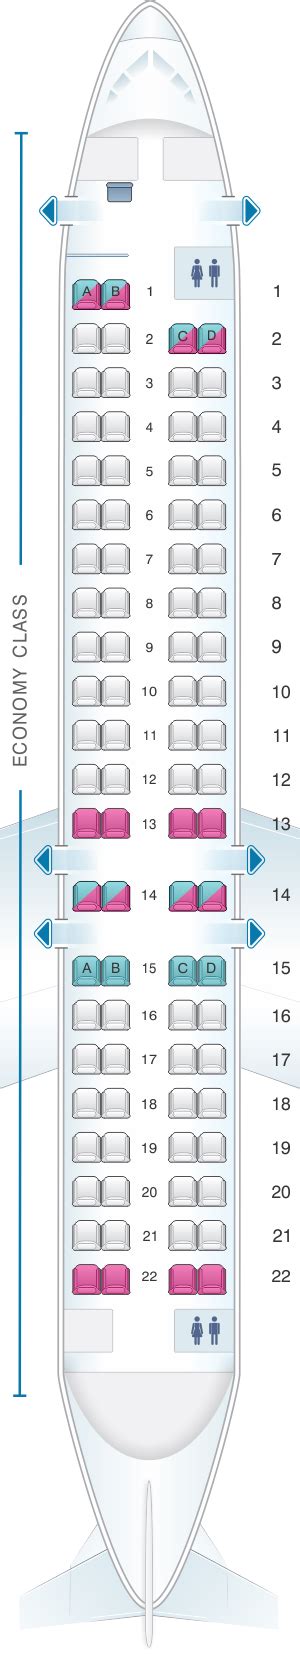 canadair regional jet crj seating chart chart walls hot sex picture